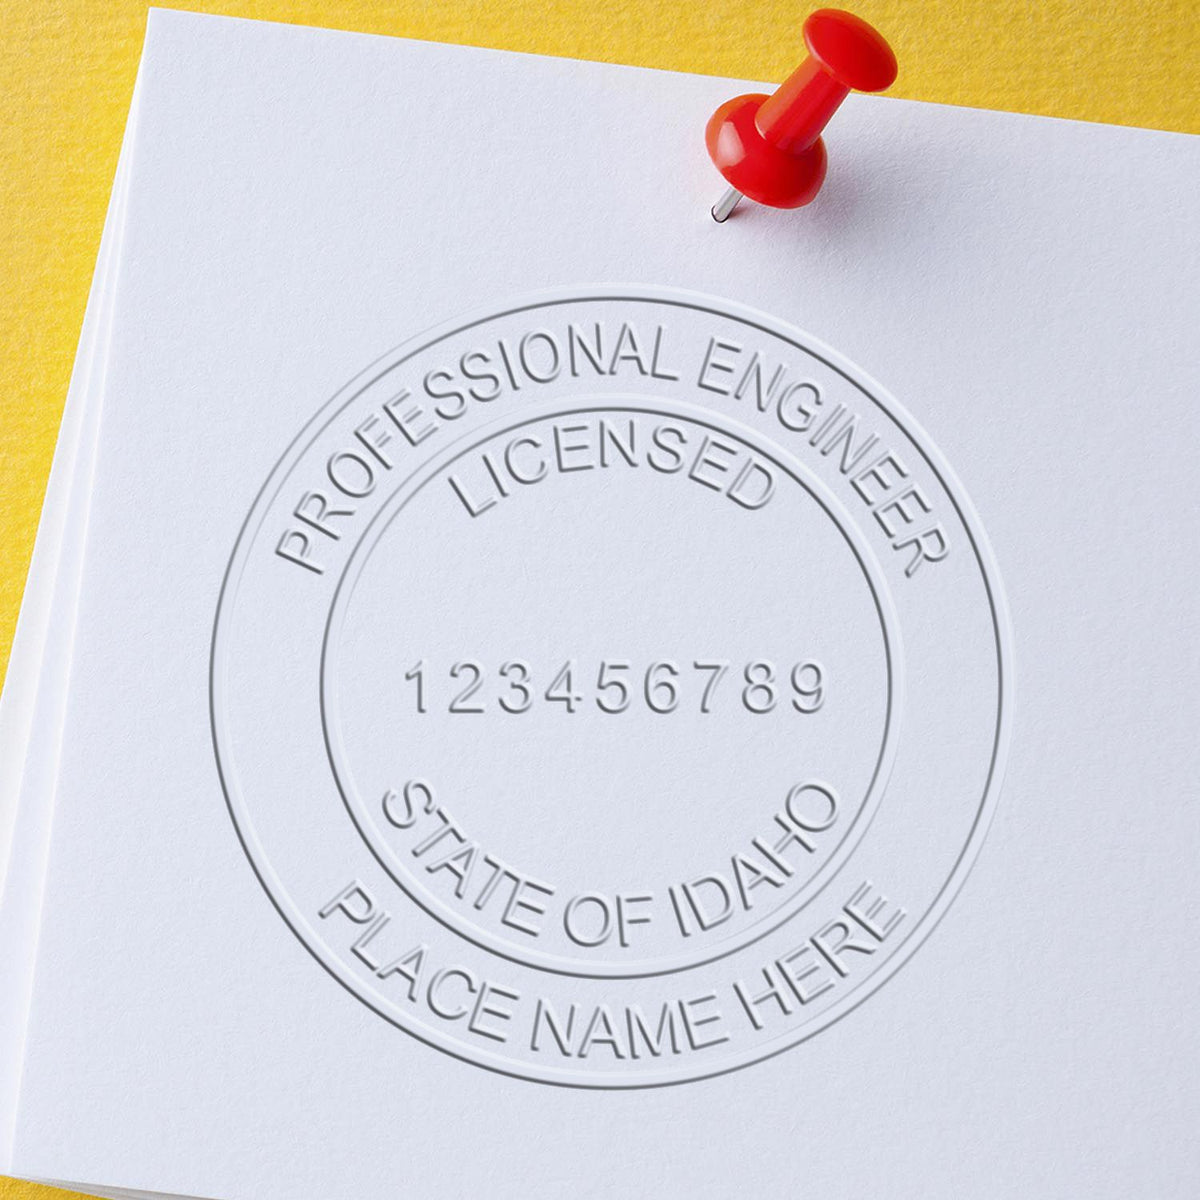 An in use photo of the Hybrid Idaho Engineer Seal showing a sample imprint on a cardstock